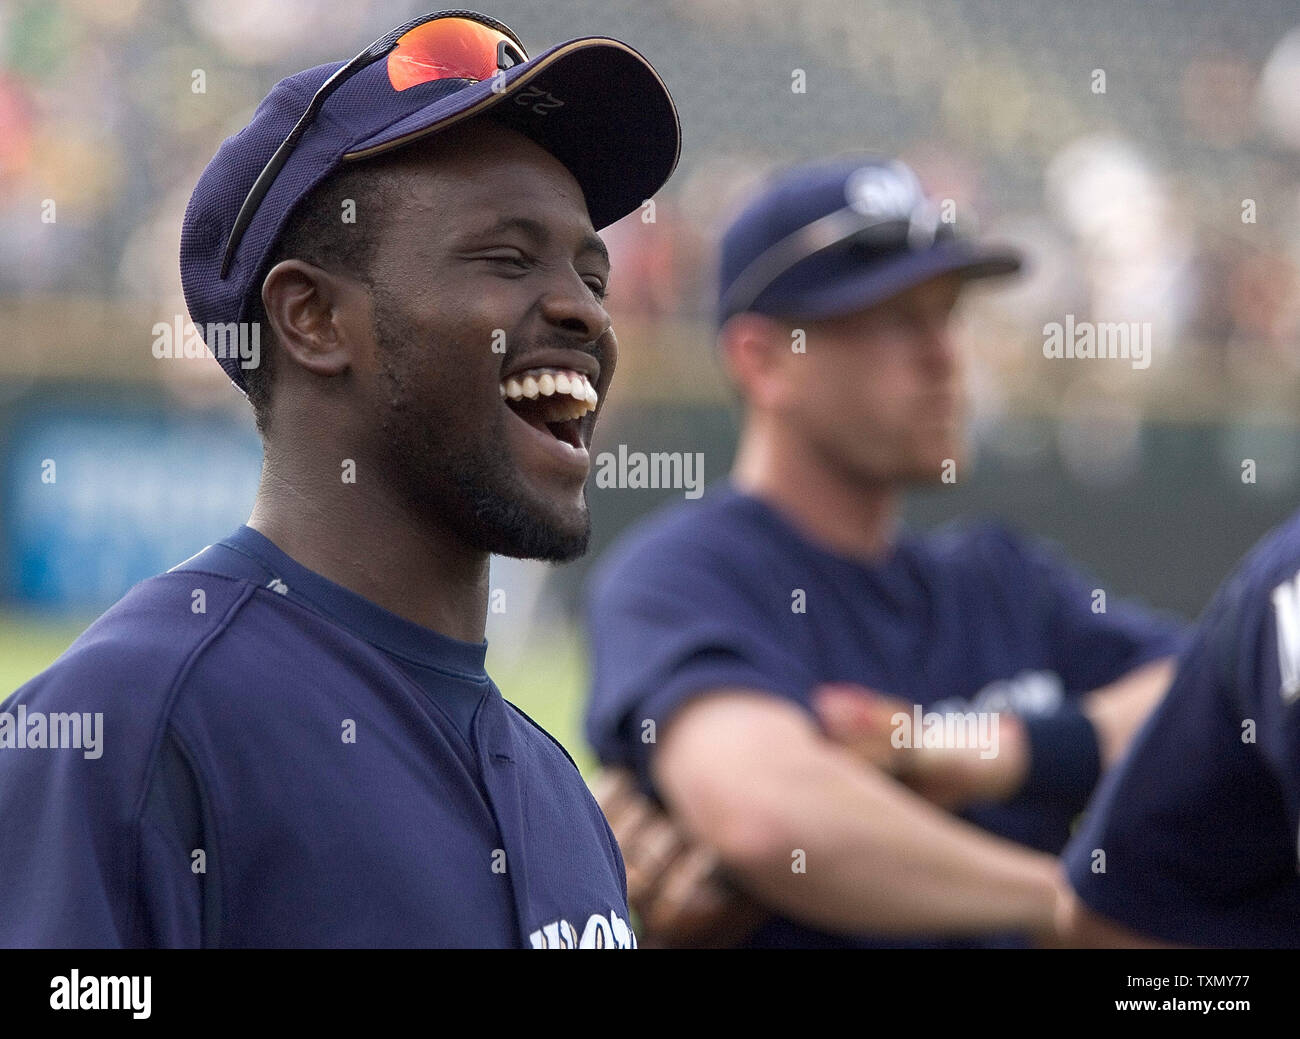 Milwaukee Brewers Tony Gwynn (L), son of San Diego Padres great Tony Gwynn, laughs with teammates prior to game against the Colorado Rockies at Coors Field in Denver, Colorado July 31, 2006.    (UPI Photo/Gary C. Caskey) Stock Photo